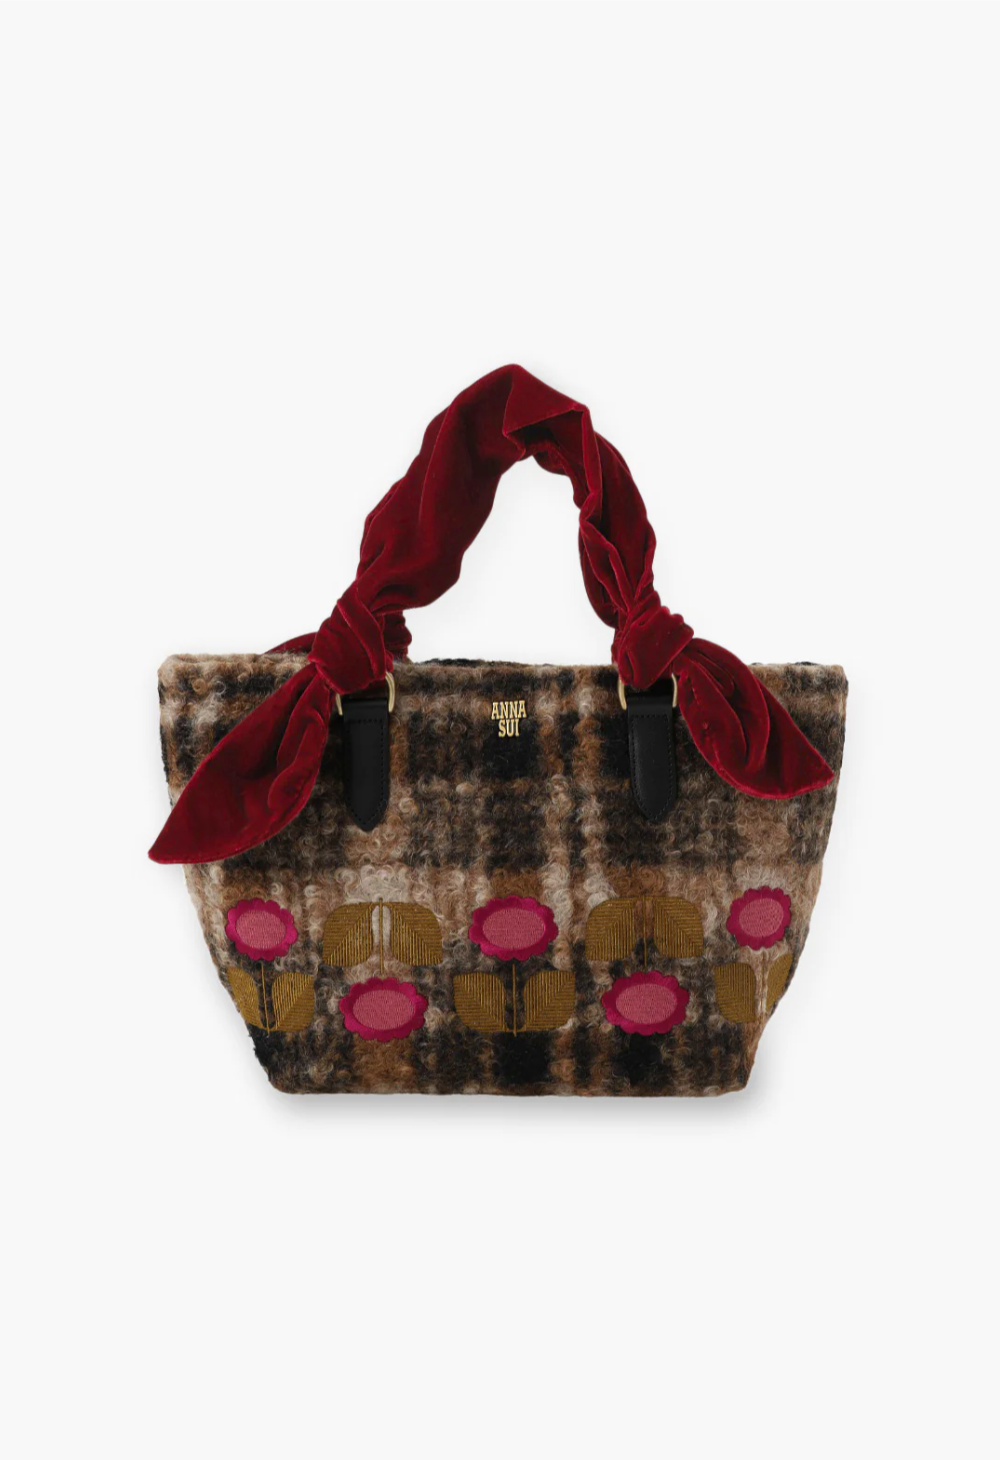 Tote, Daisy motifs on a brown plaid fur print, a playful sophistication perfect for any occasion